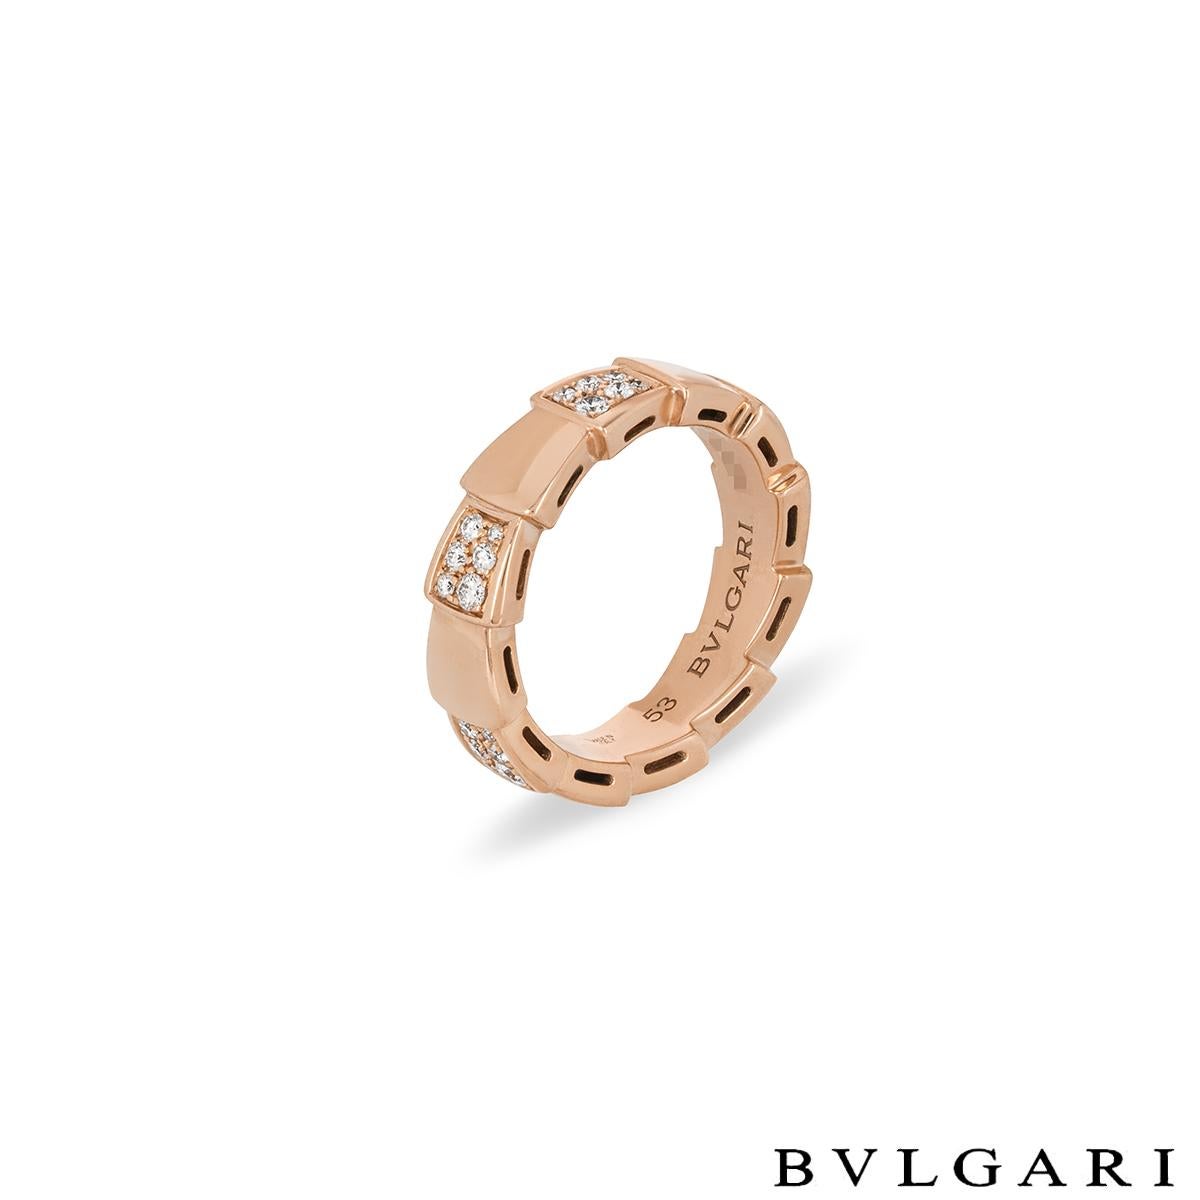 A sophisticated 18k rose gold diamond ring by Bvlgari from the Serpenti collection. The Serpenti Viper ring coils around the finger, comprising of alternating stations of 6 high polish and 6 diamond set stations. There are 36 round brilliant cut